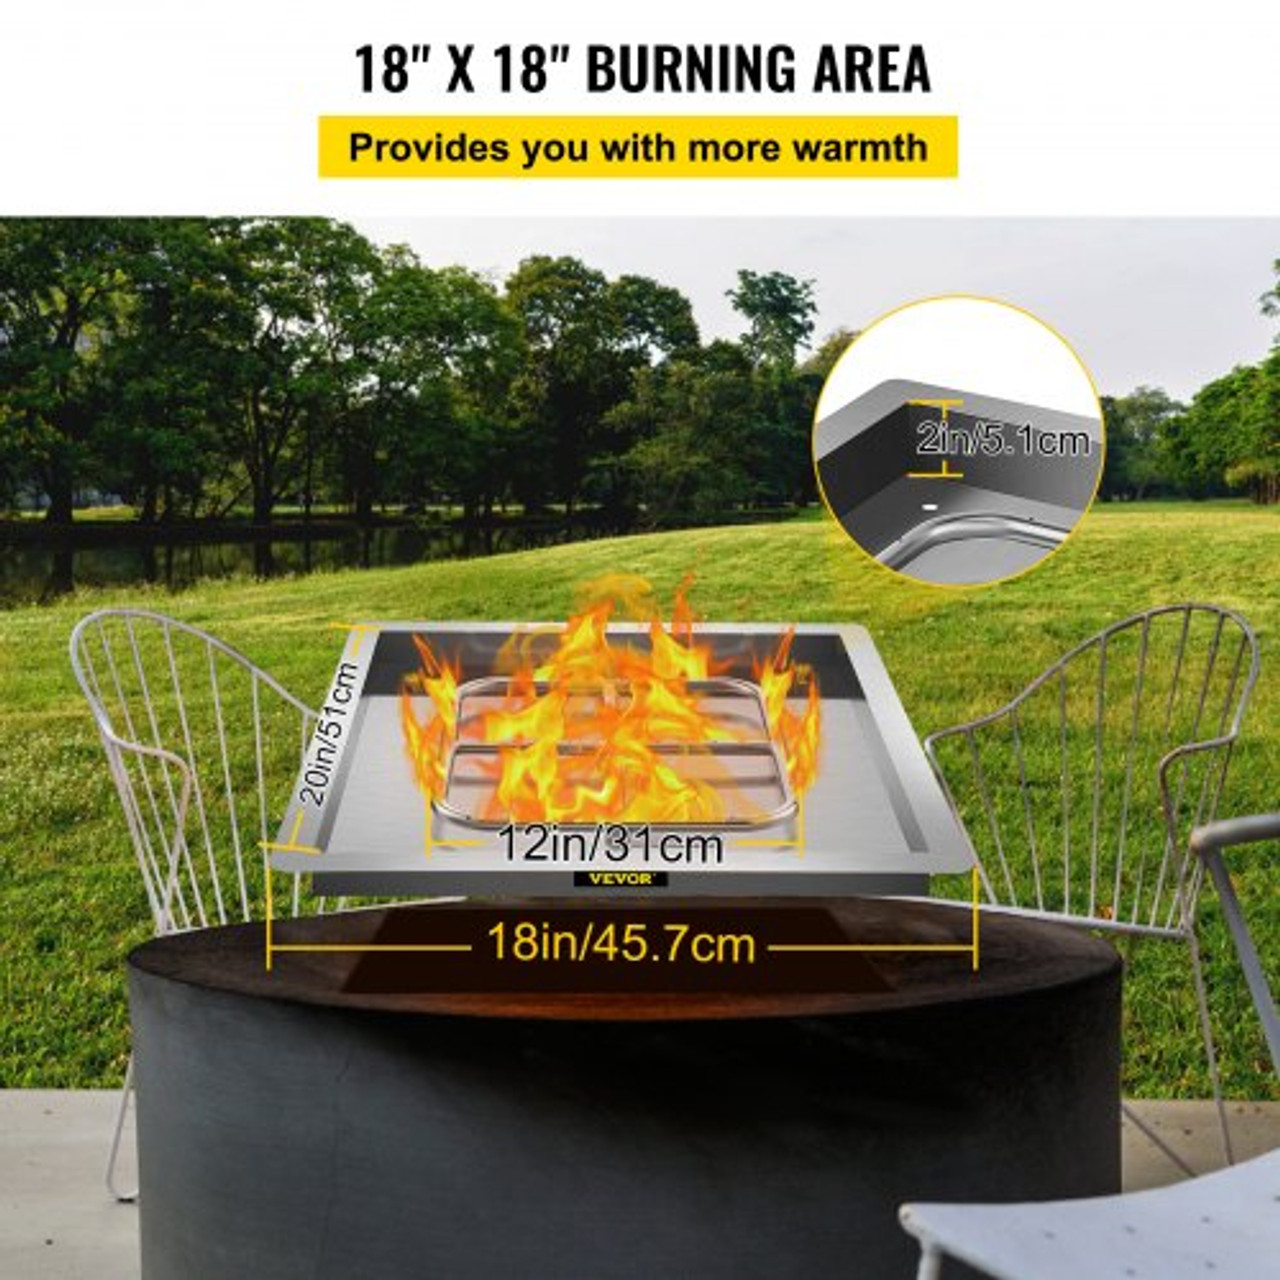 Drop in Fire Pit Pan, 18" x 18" Square Fire Pit Burner, Stainless Steel Gas Fire Pan, Fire Pit Burner Pan w/ 1 Pack Volcanic Rock Fire Pit Insert w/ 90K BTU for Keeping Warm w/ Family & Friends